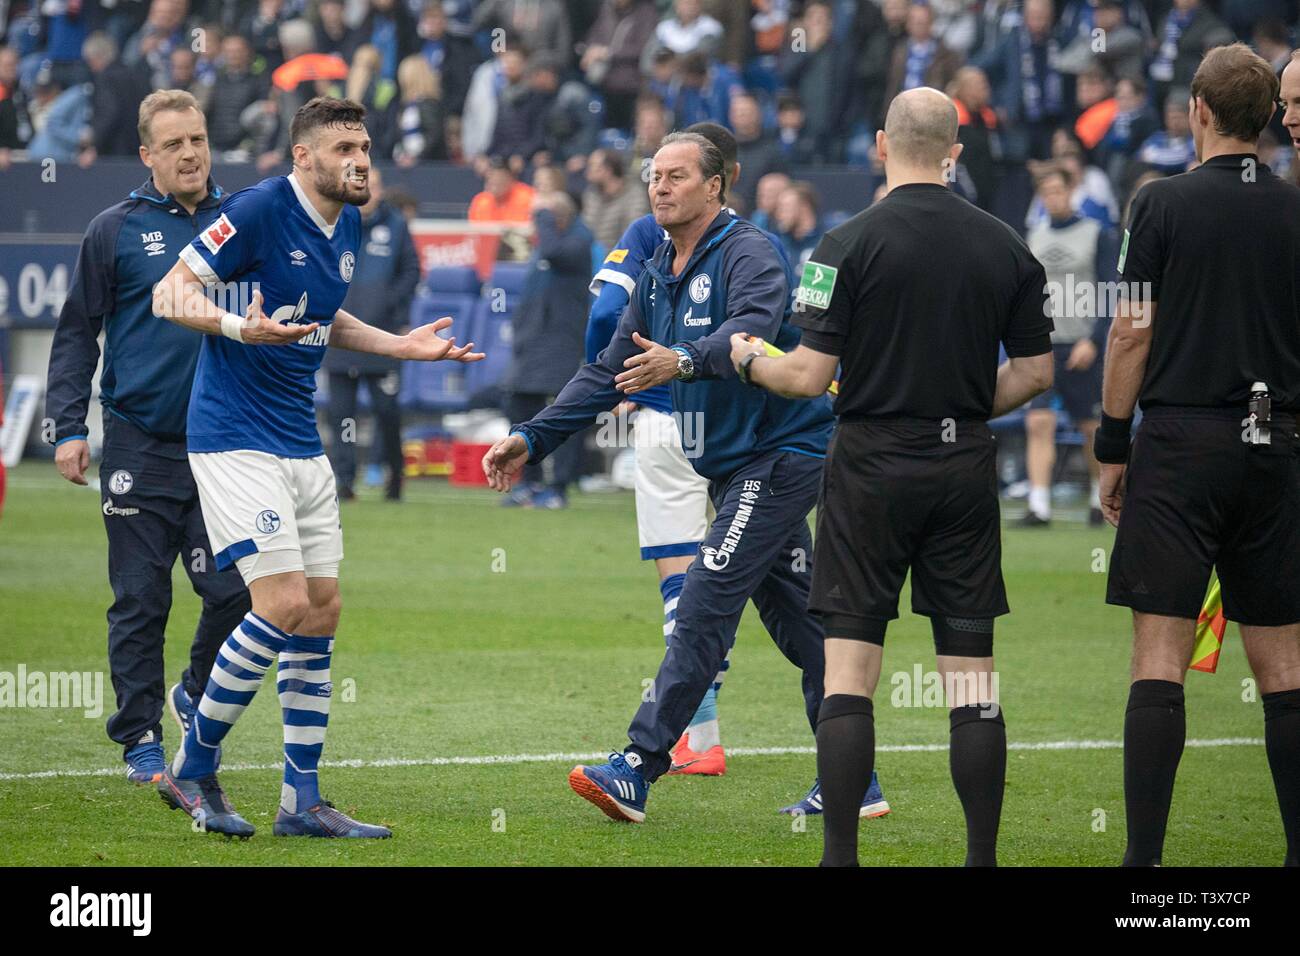 Gelsenkirchen, Deutschland. 06th Apr, 2019. Daniel CALIGIURI (GER) (l.vorn) complains after the final whistle violently at the referee team referee Sascha STEGEMANN (GER, r.) Because of a penalty in the after-play time; coach Huub STEVENS (GE, Mi.) tries to calm his player; Soccer 1. Bundesliga, 28. matchday, FC Schalke 04 (GE) - Eintracht Frankfurt (F) 1: 2 on 06/04/2019 in Gelsenkirchen/Germany. DFL regulations prohibit any use of images as image sequences and/or quasi-video | usage worldwide Credit: dpa/Alamy Live News Stock Photo